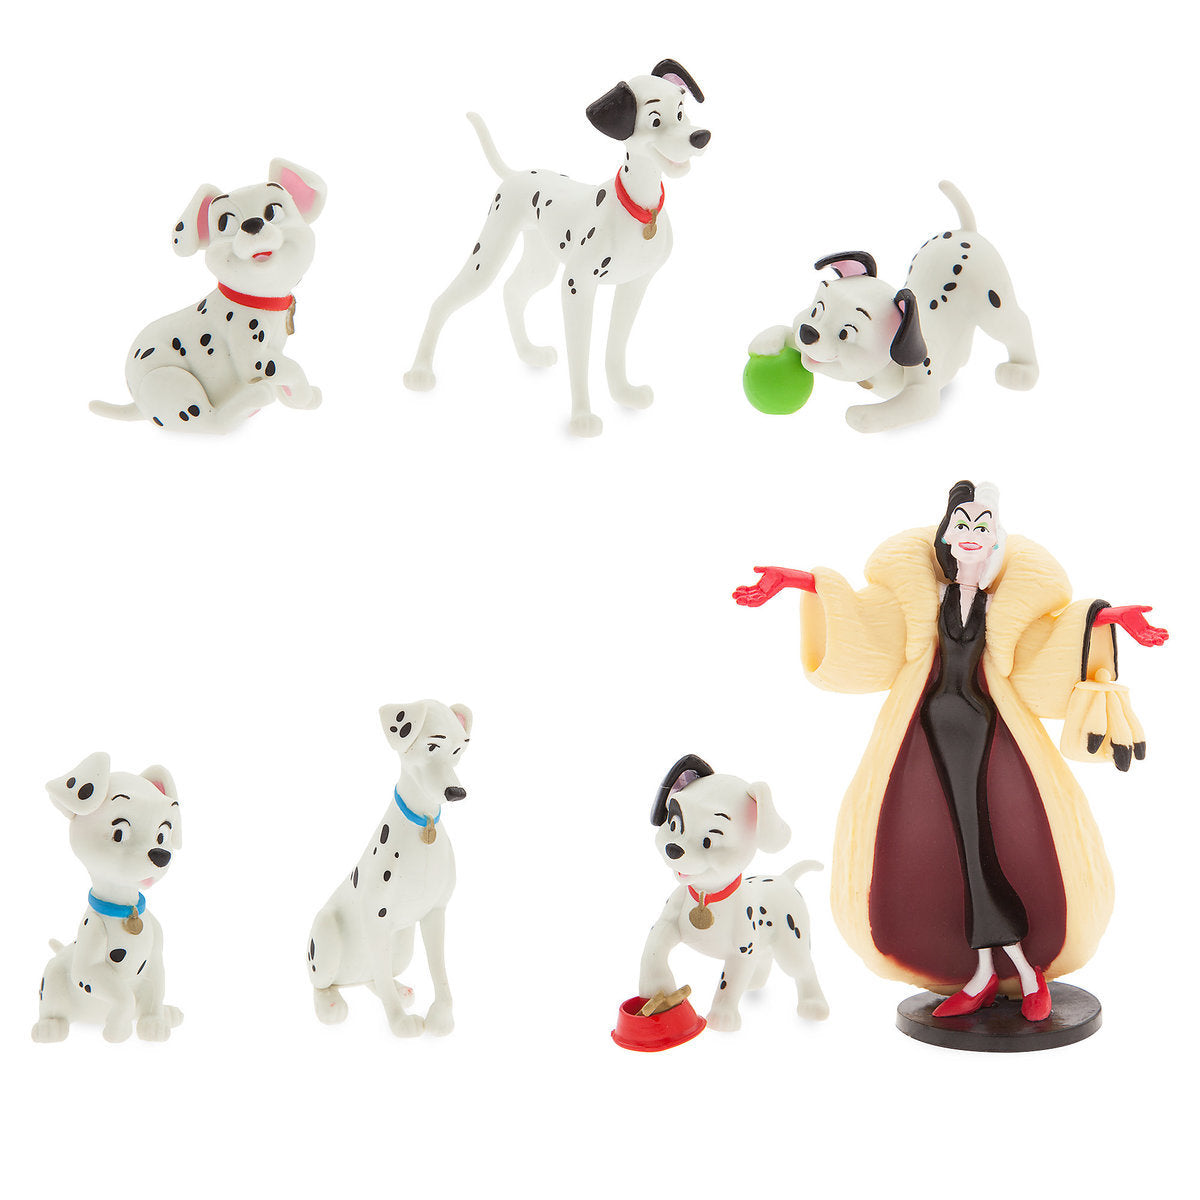 Disney Store 101 Dalmatians Figure Play Set 7 Playset Cake Topper New with box